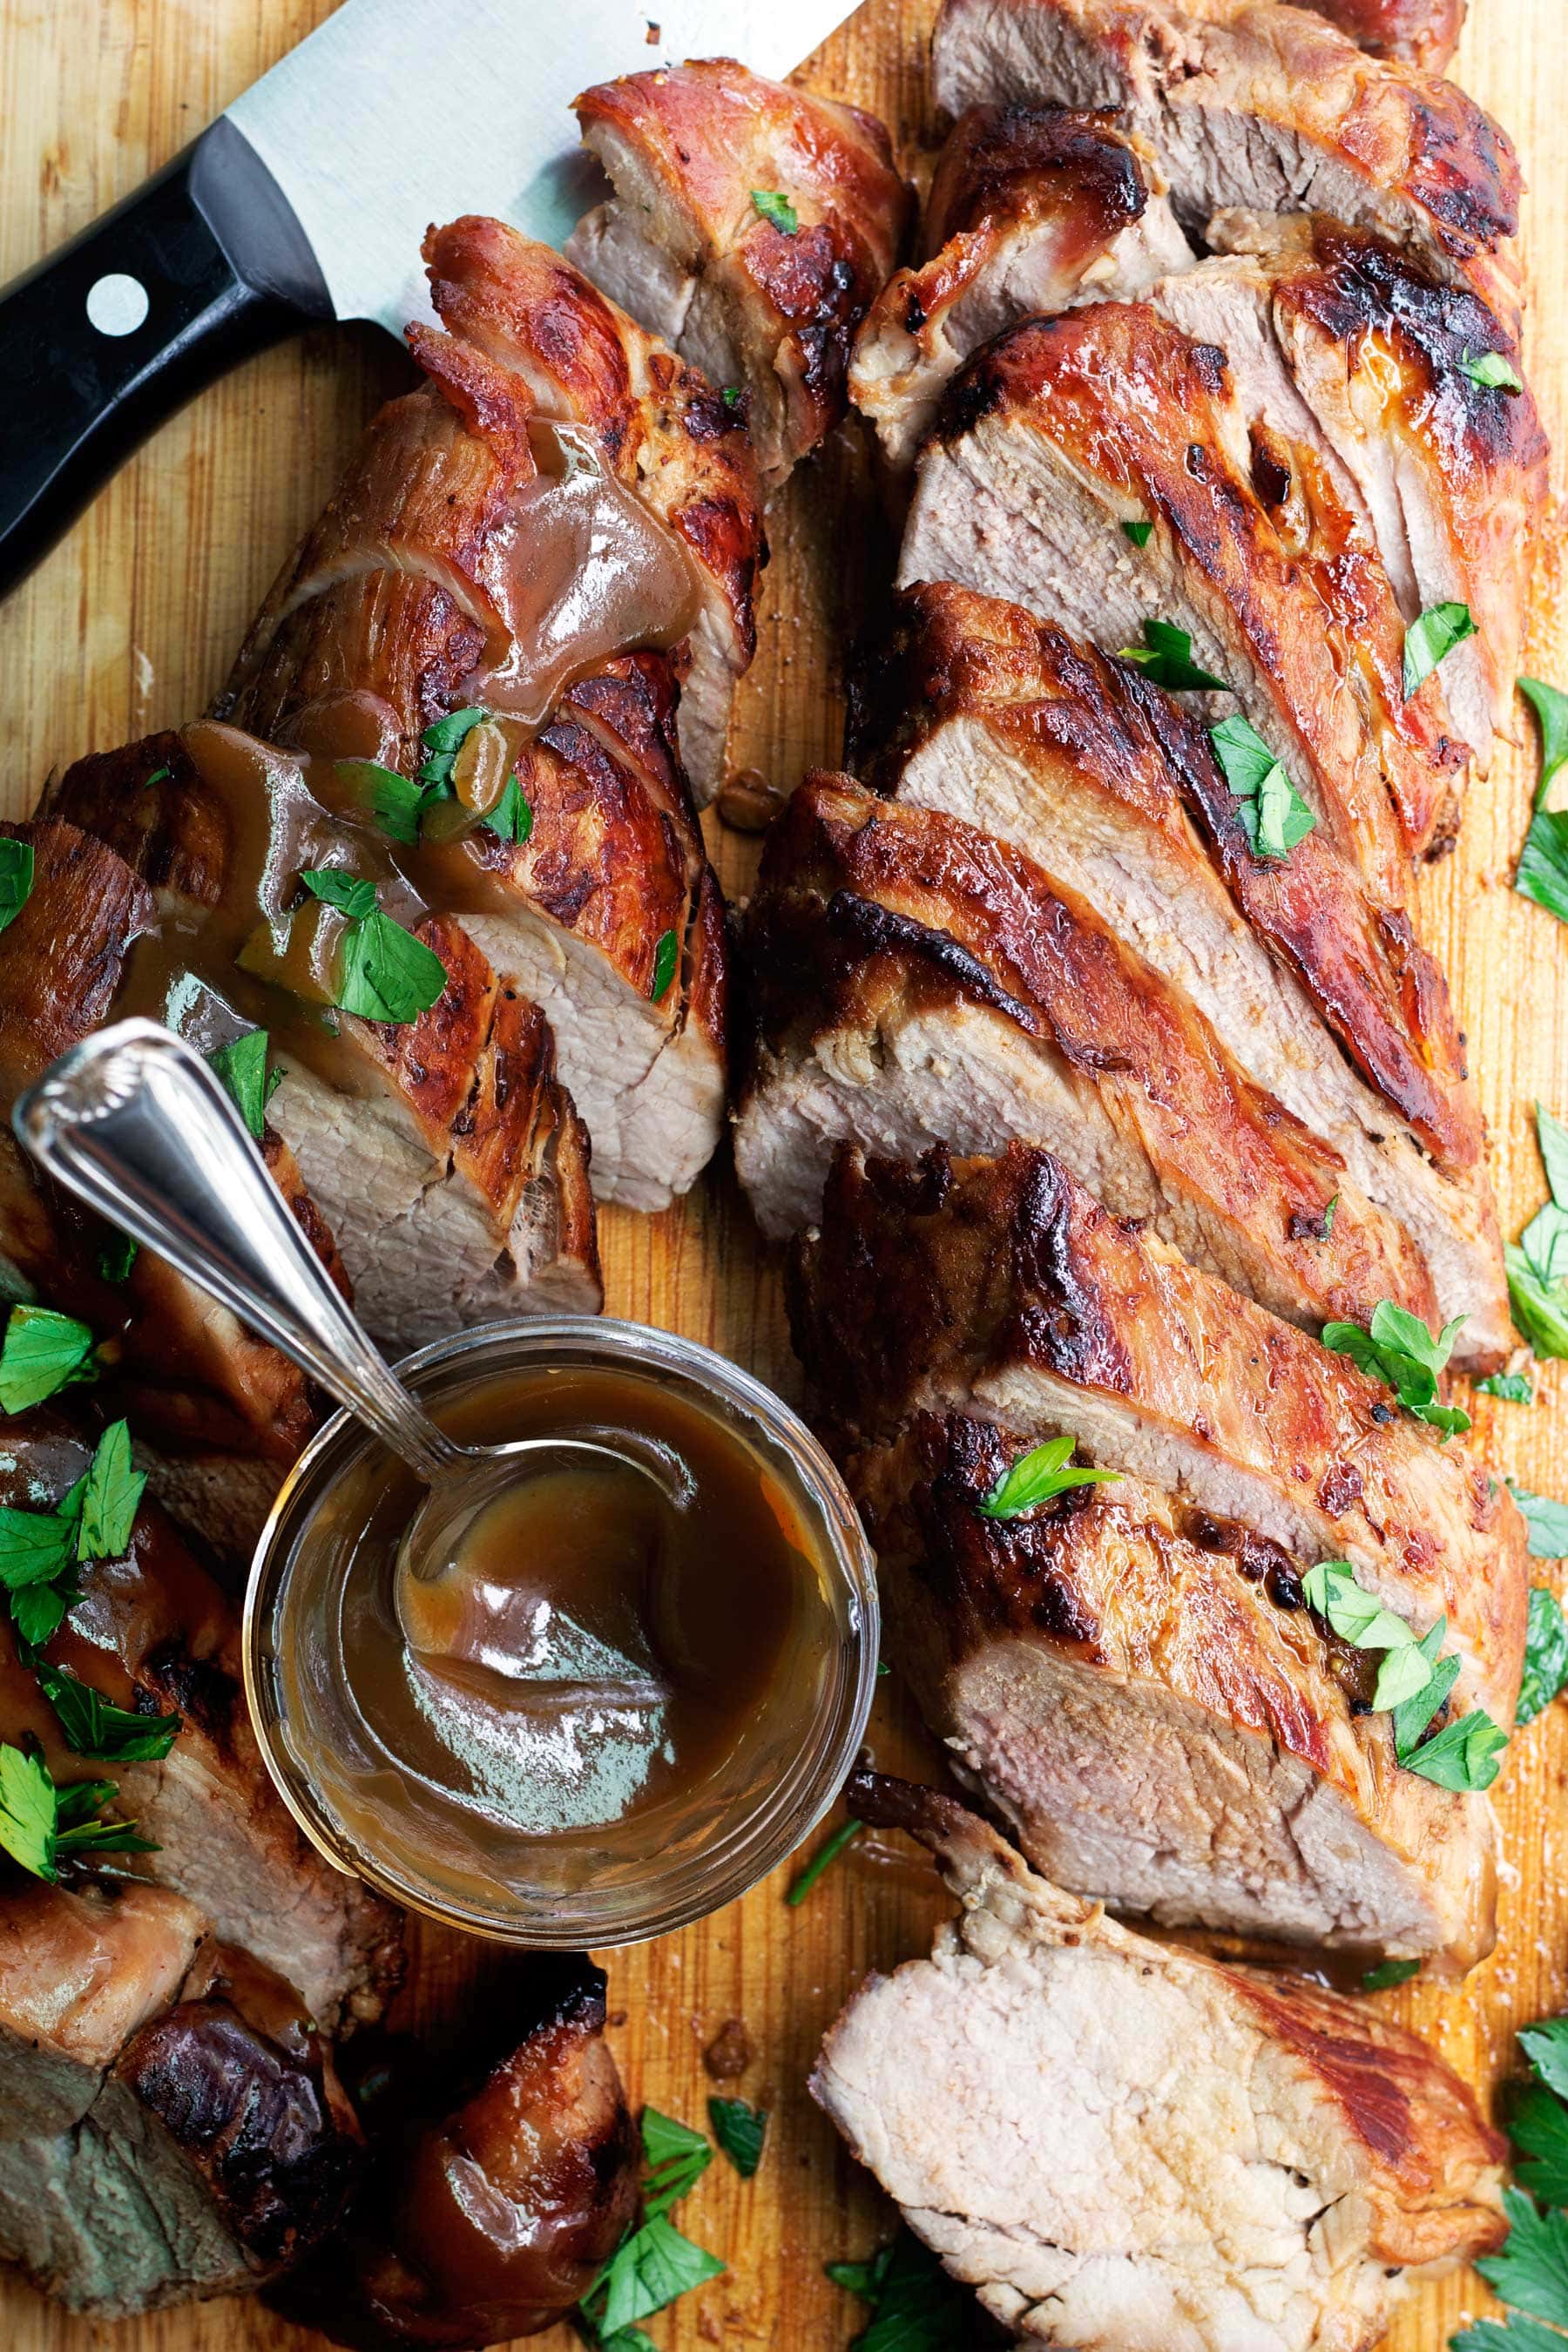 Easy to make and only 5 ingredients! This Maple Bourbon Pork Tenderloin recipe is a perfect easy paleo dinner recipe for any night of the week. This recipe is also gluten free, dairy free, and can be made low carb and keto! Keto pork tenderloin. Easy pork tenderloin. Paleo pork tenderloin. Low carb dinner. #maplesyrup #paleodinner #ketodinner #lowcarbdinner #porktenderloin #monkfruit #lakanto #paleo #keto #lowcarb #glutenfreedinner #healthydinner